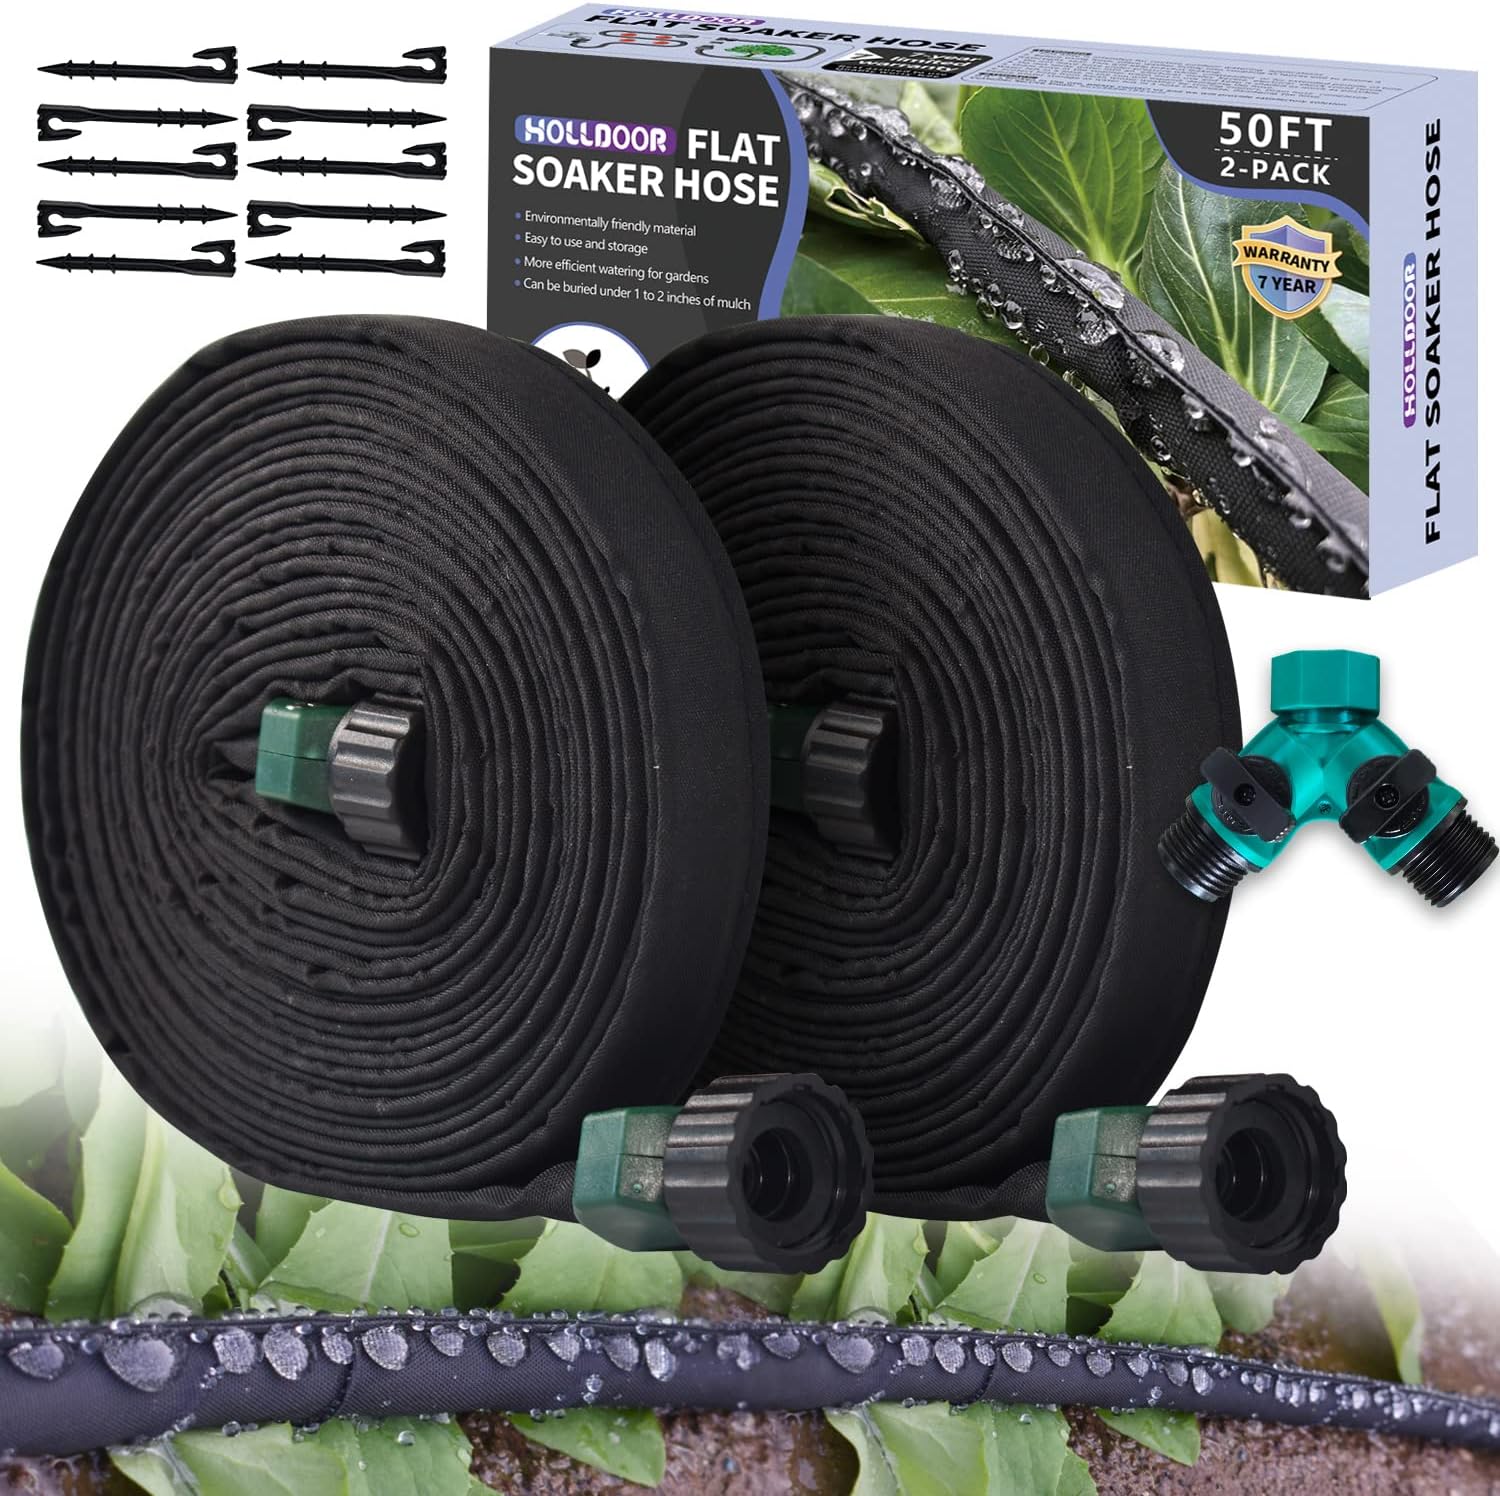 2-Pack Flat Soaker Hose 50 Ft for Garden Beds with [...]